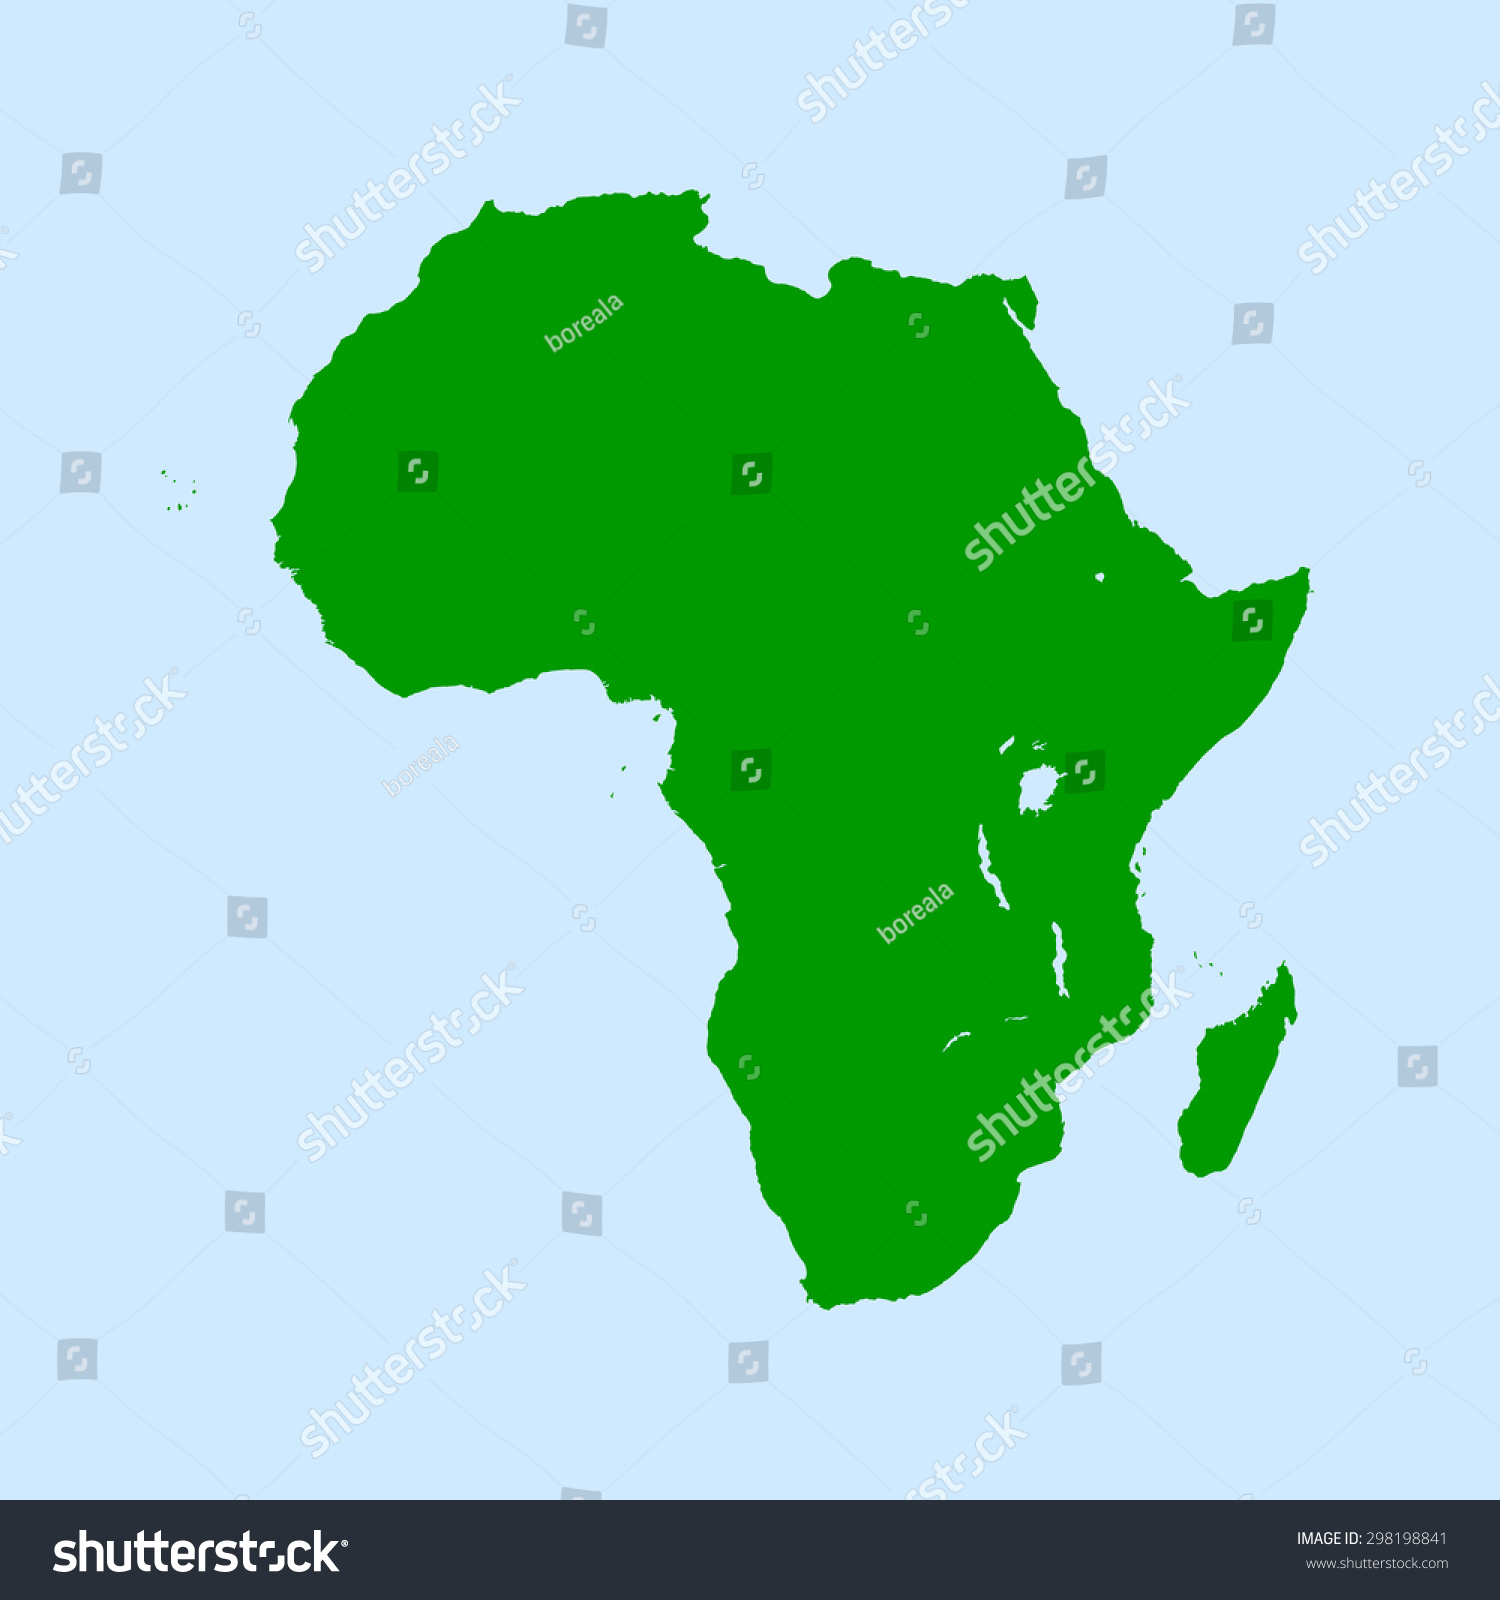 Map Of Africa Royalty Free Stock Vector 298198841 3298